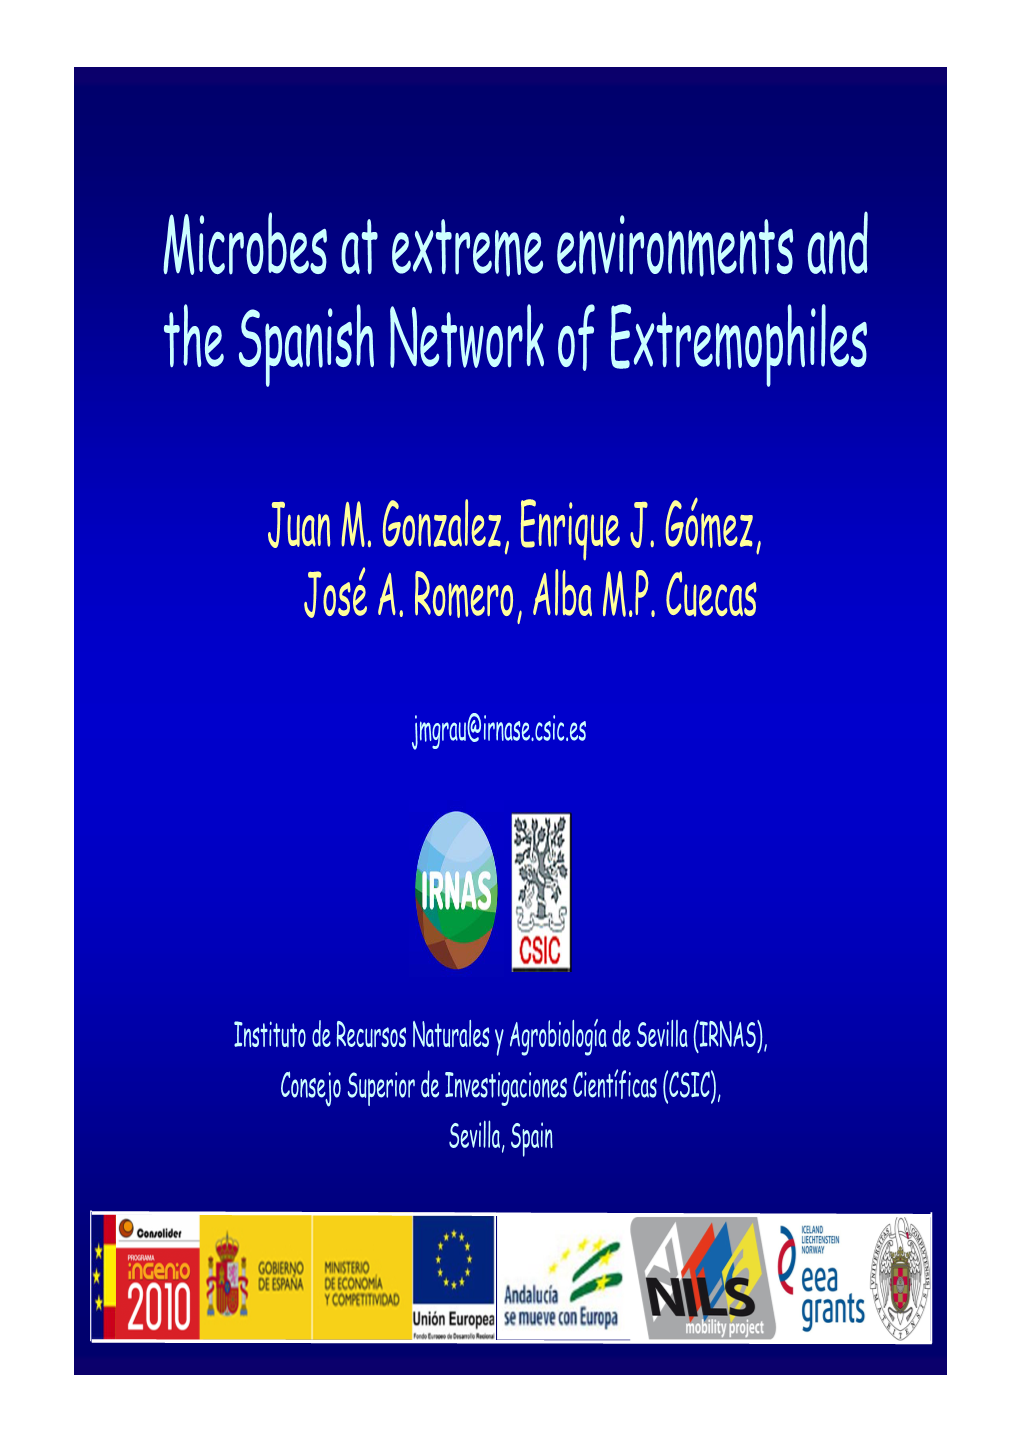 Microbes at Extreme Environments and the Spanish Network of Extremophiles